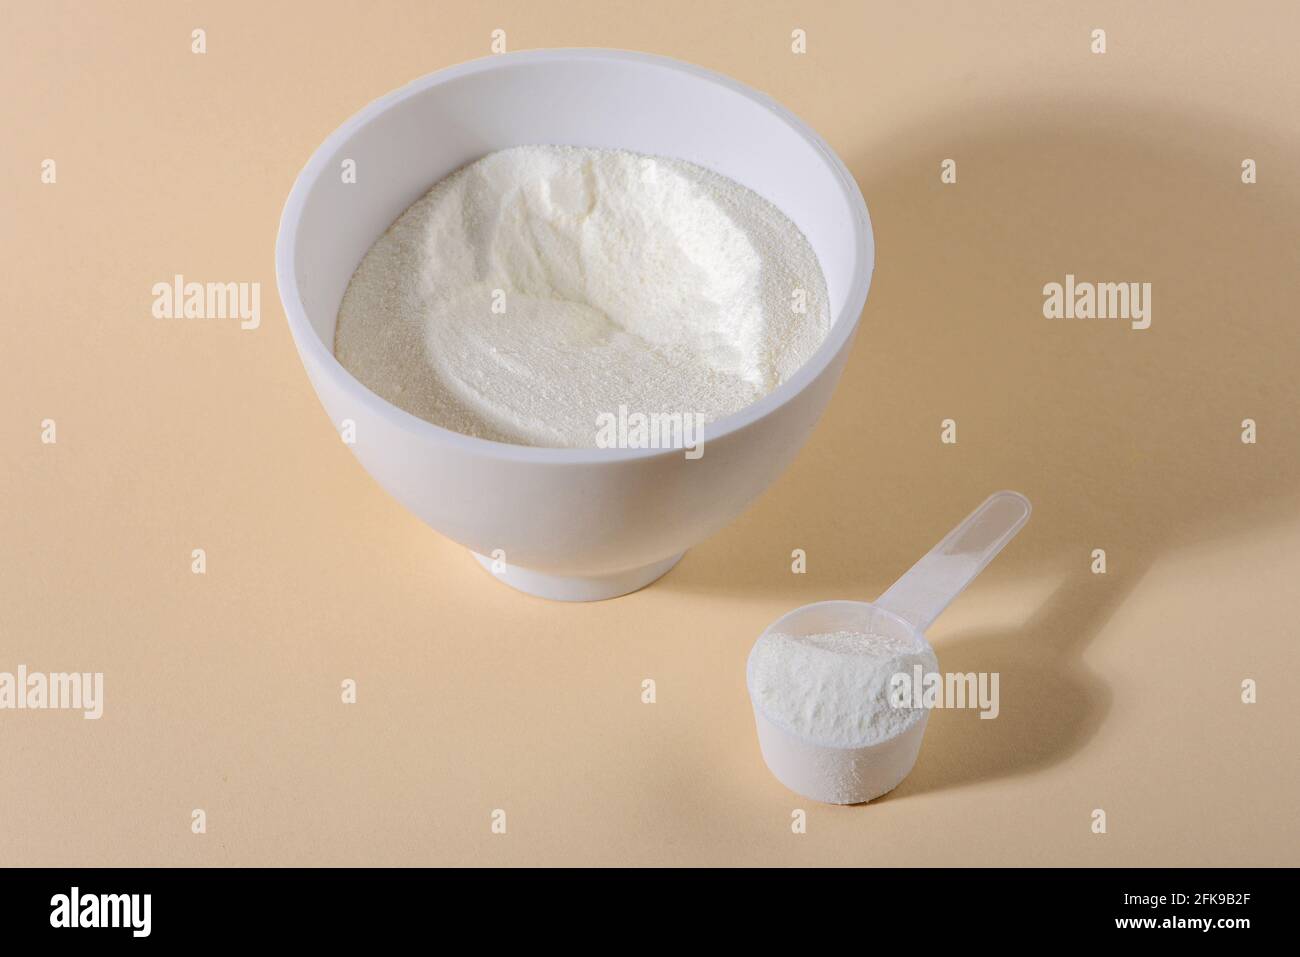 Collagen powder on beige background. Natural beauty and health supplement for skin and bones. Close up. Stock Photo